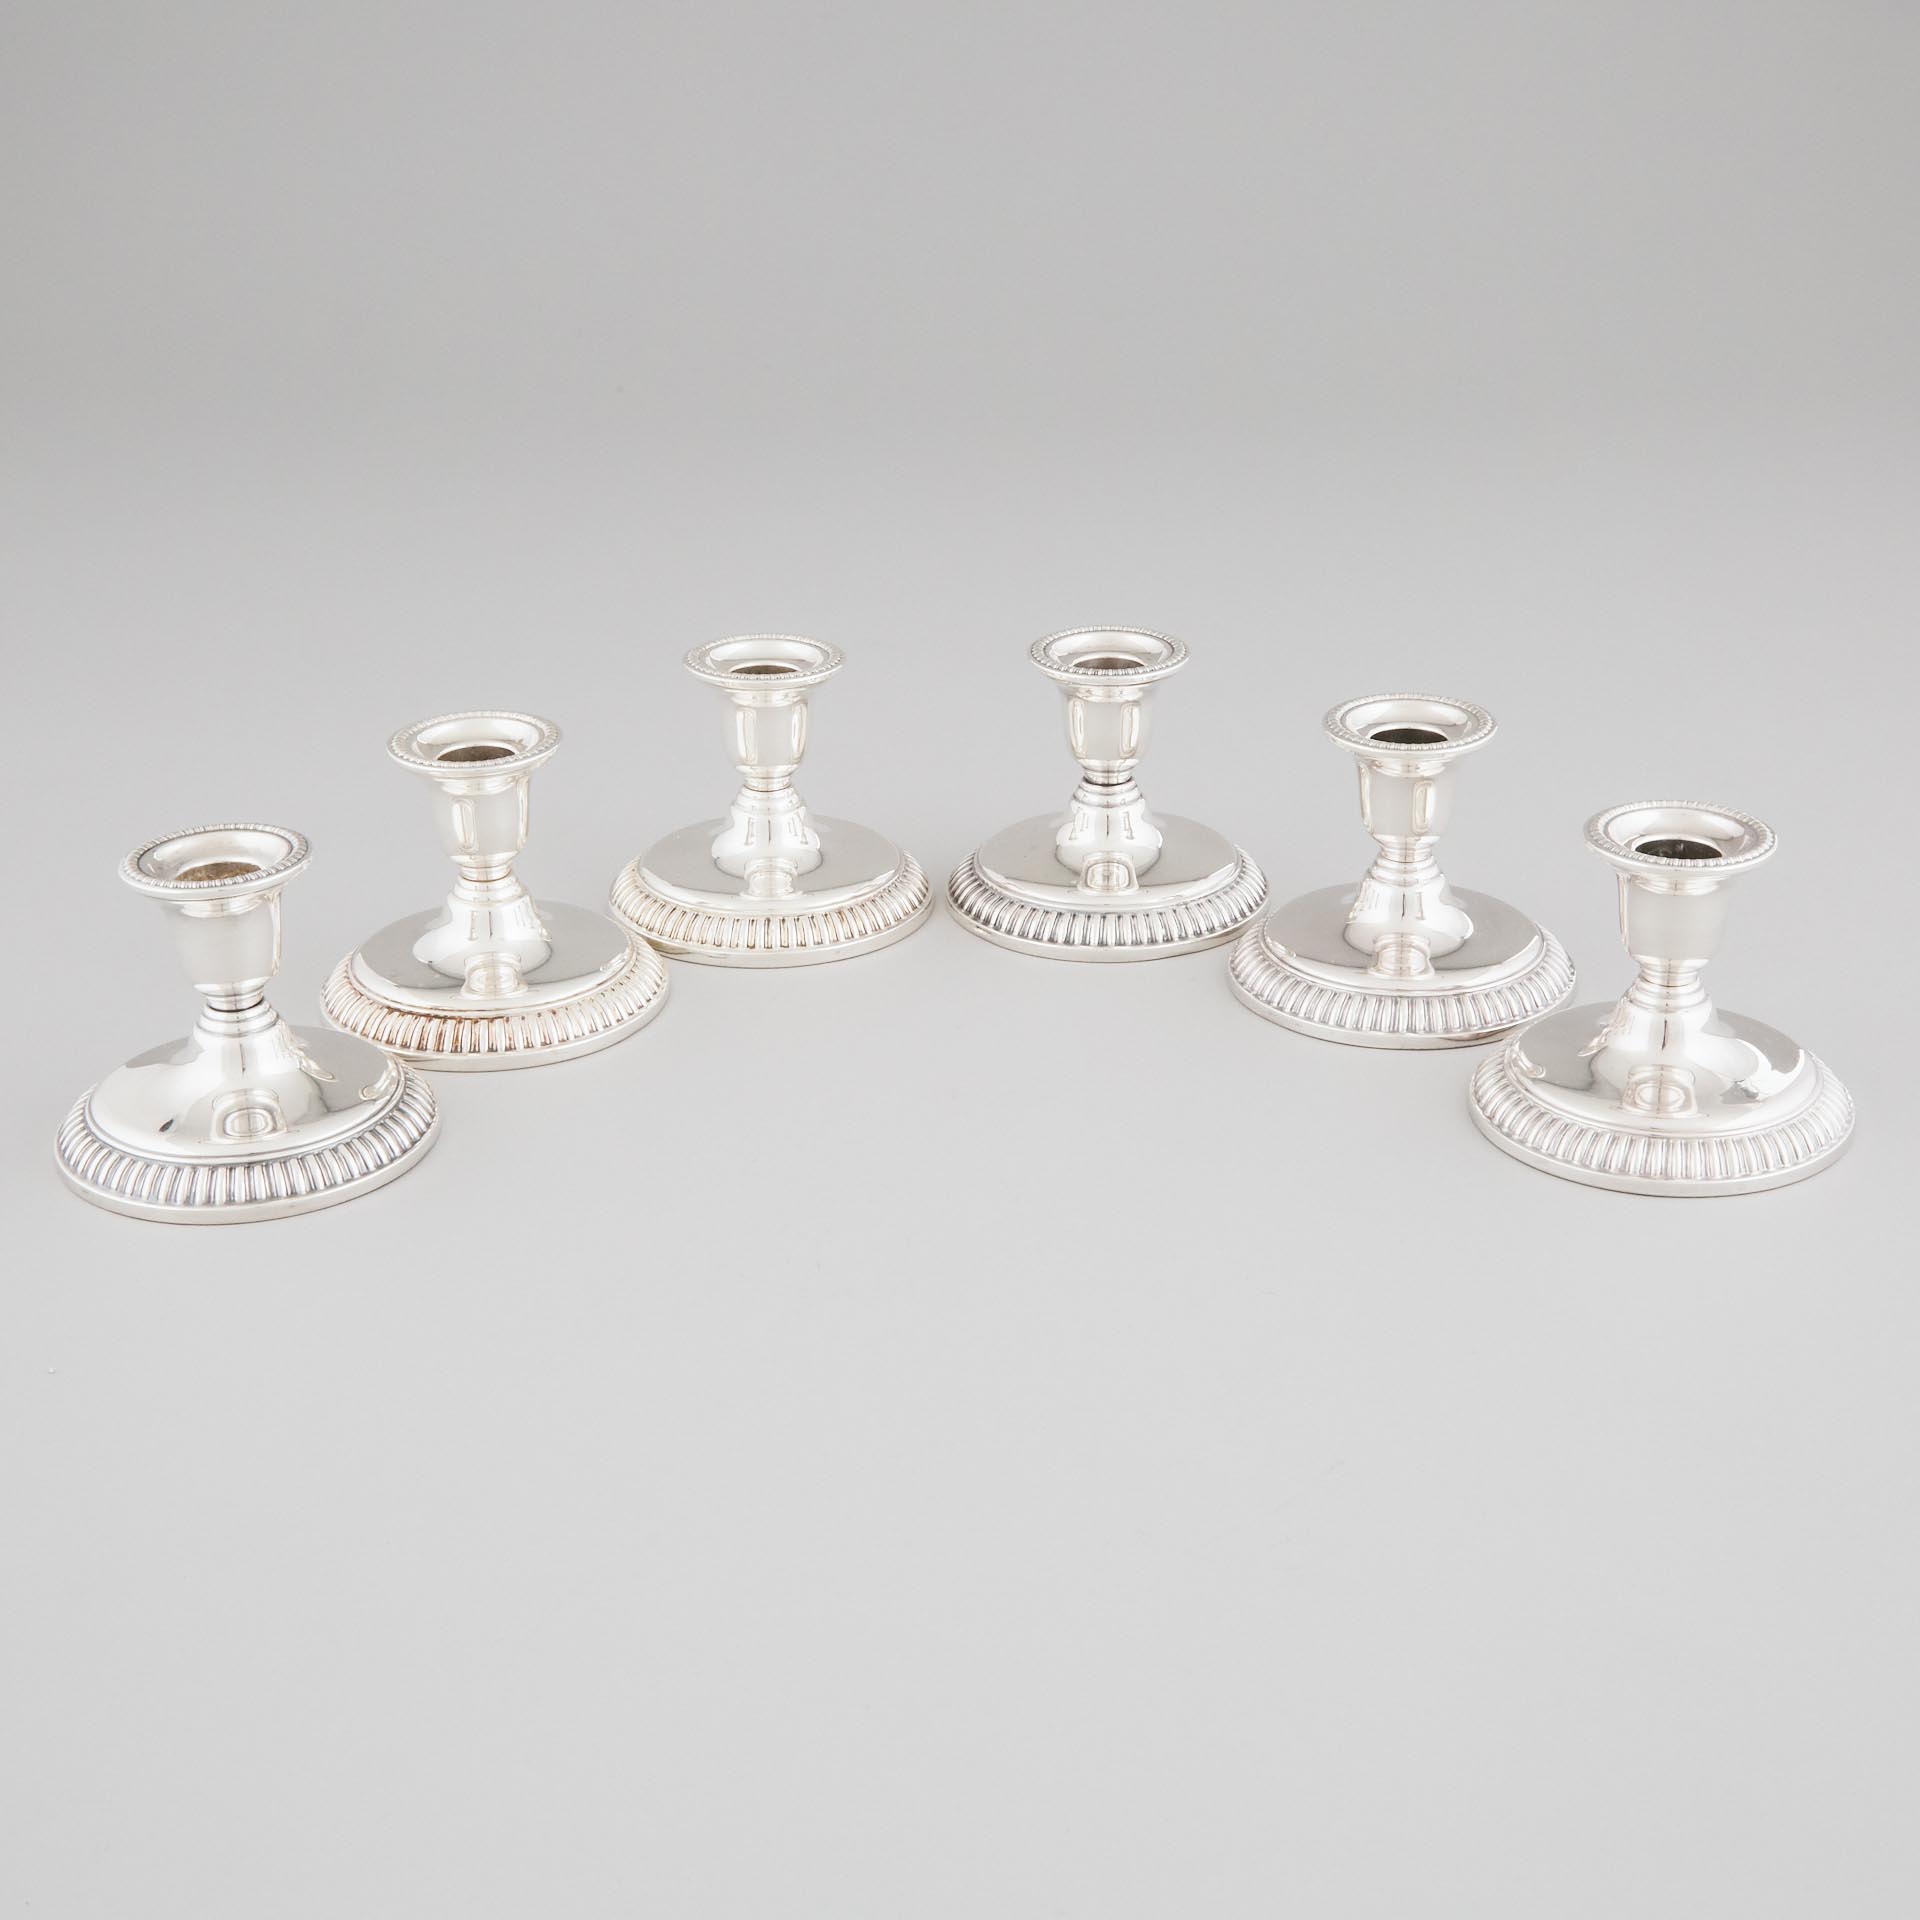 Six Canadian Silver Low Candlesticks, Henry Birks & Sons, Montreal, Que., 20th century